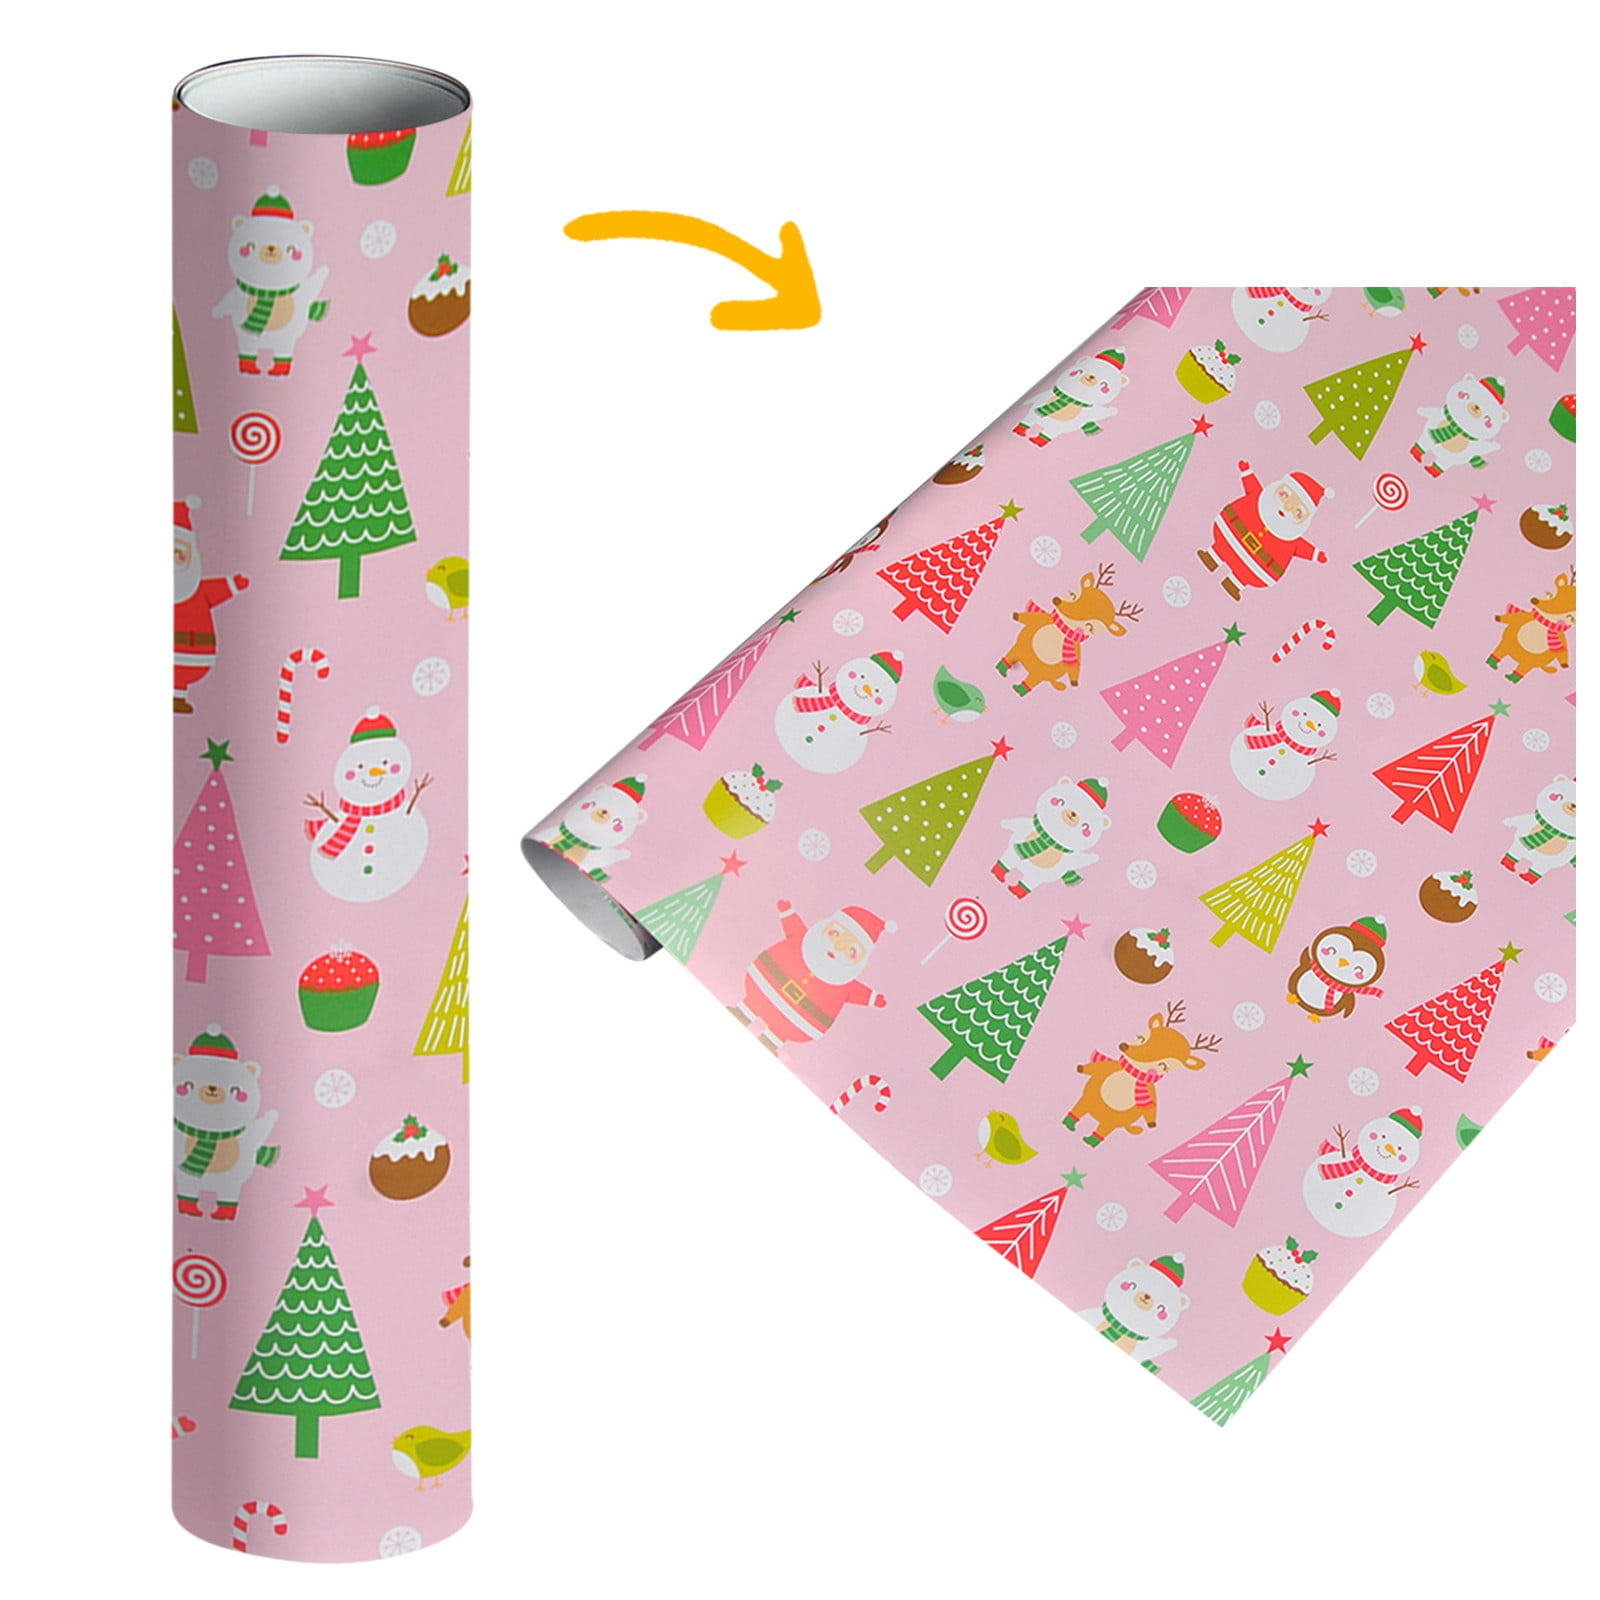 Floral Wrapping Paper Roll Bundle (12.5 sq ft per roll, 75 total sq ft –  Present Paper